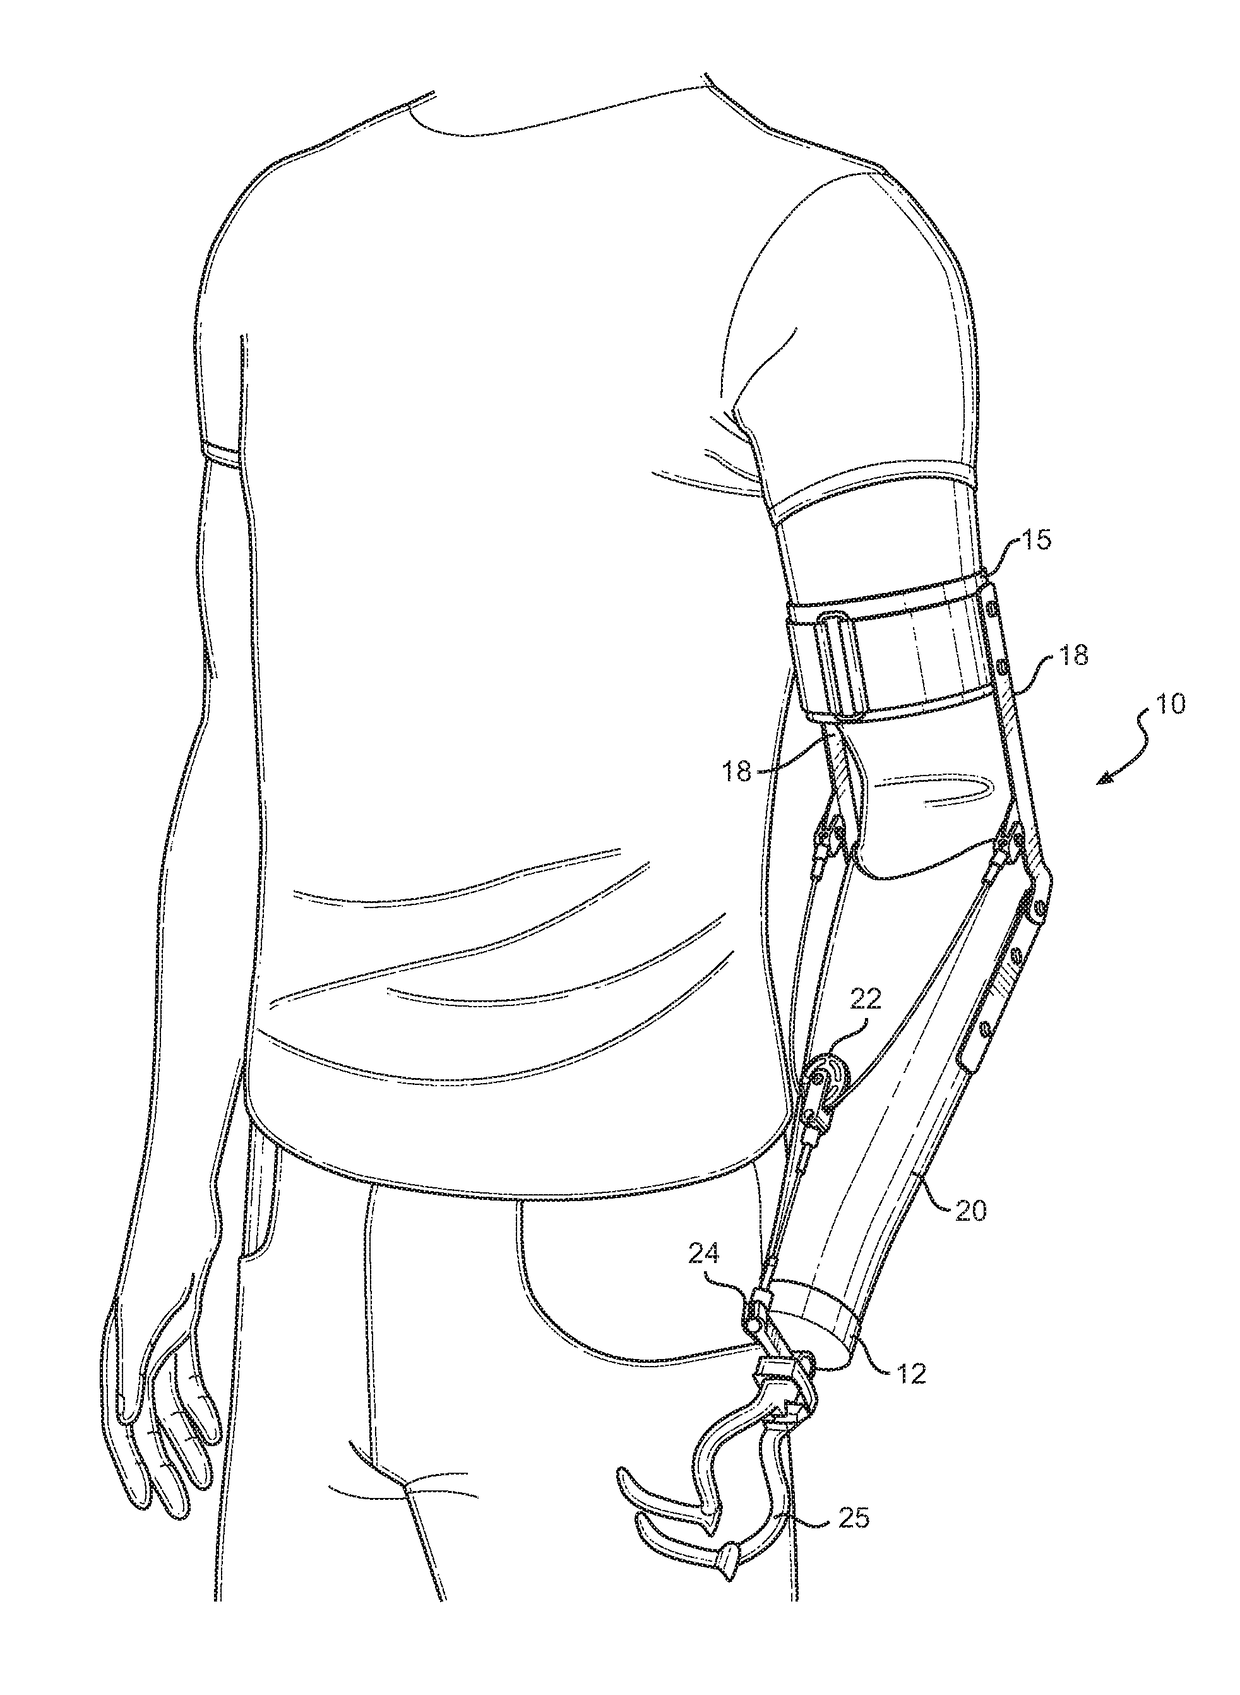 Harness for Upper Extremity Below-Elbow Prosthesis